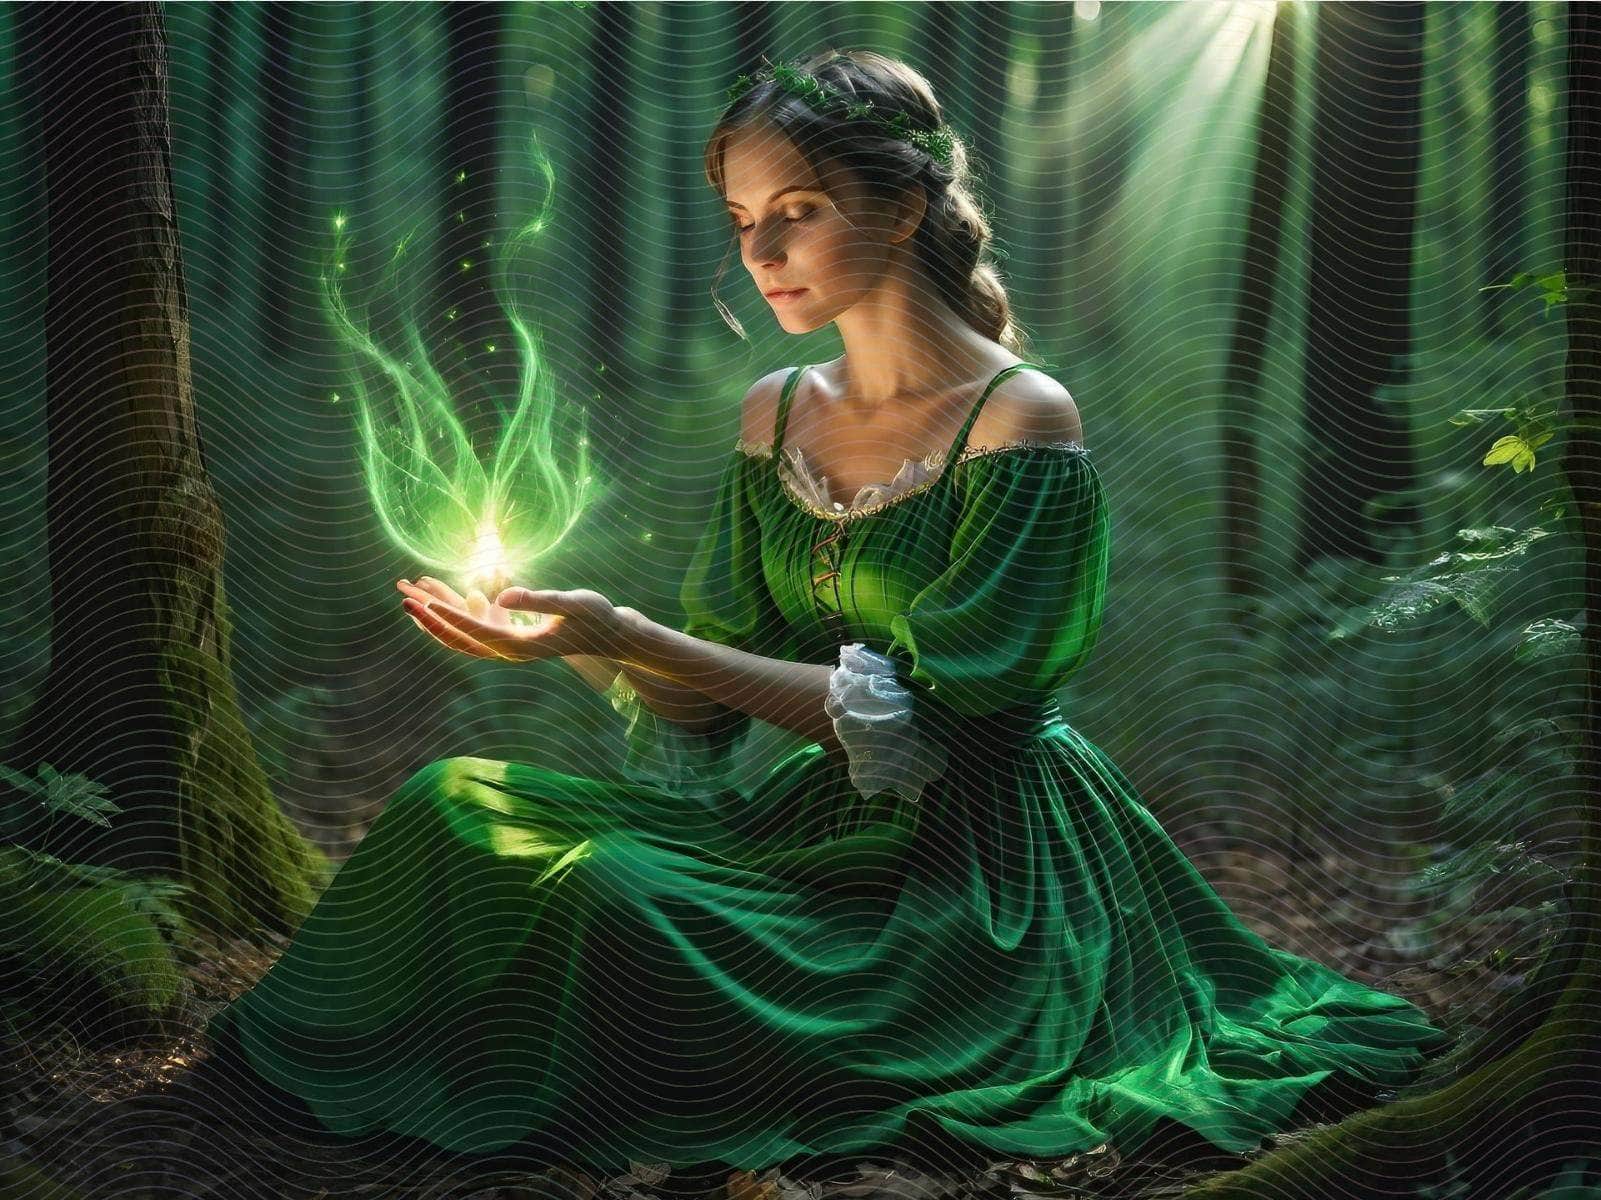 A Woman in Green Dress Sitting in the Woods Casting Magic